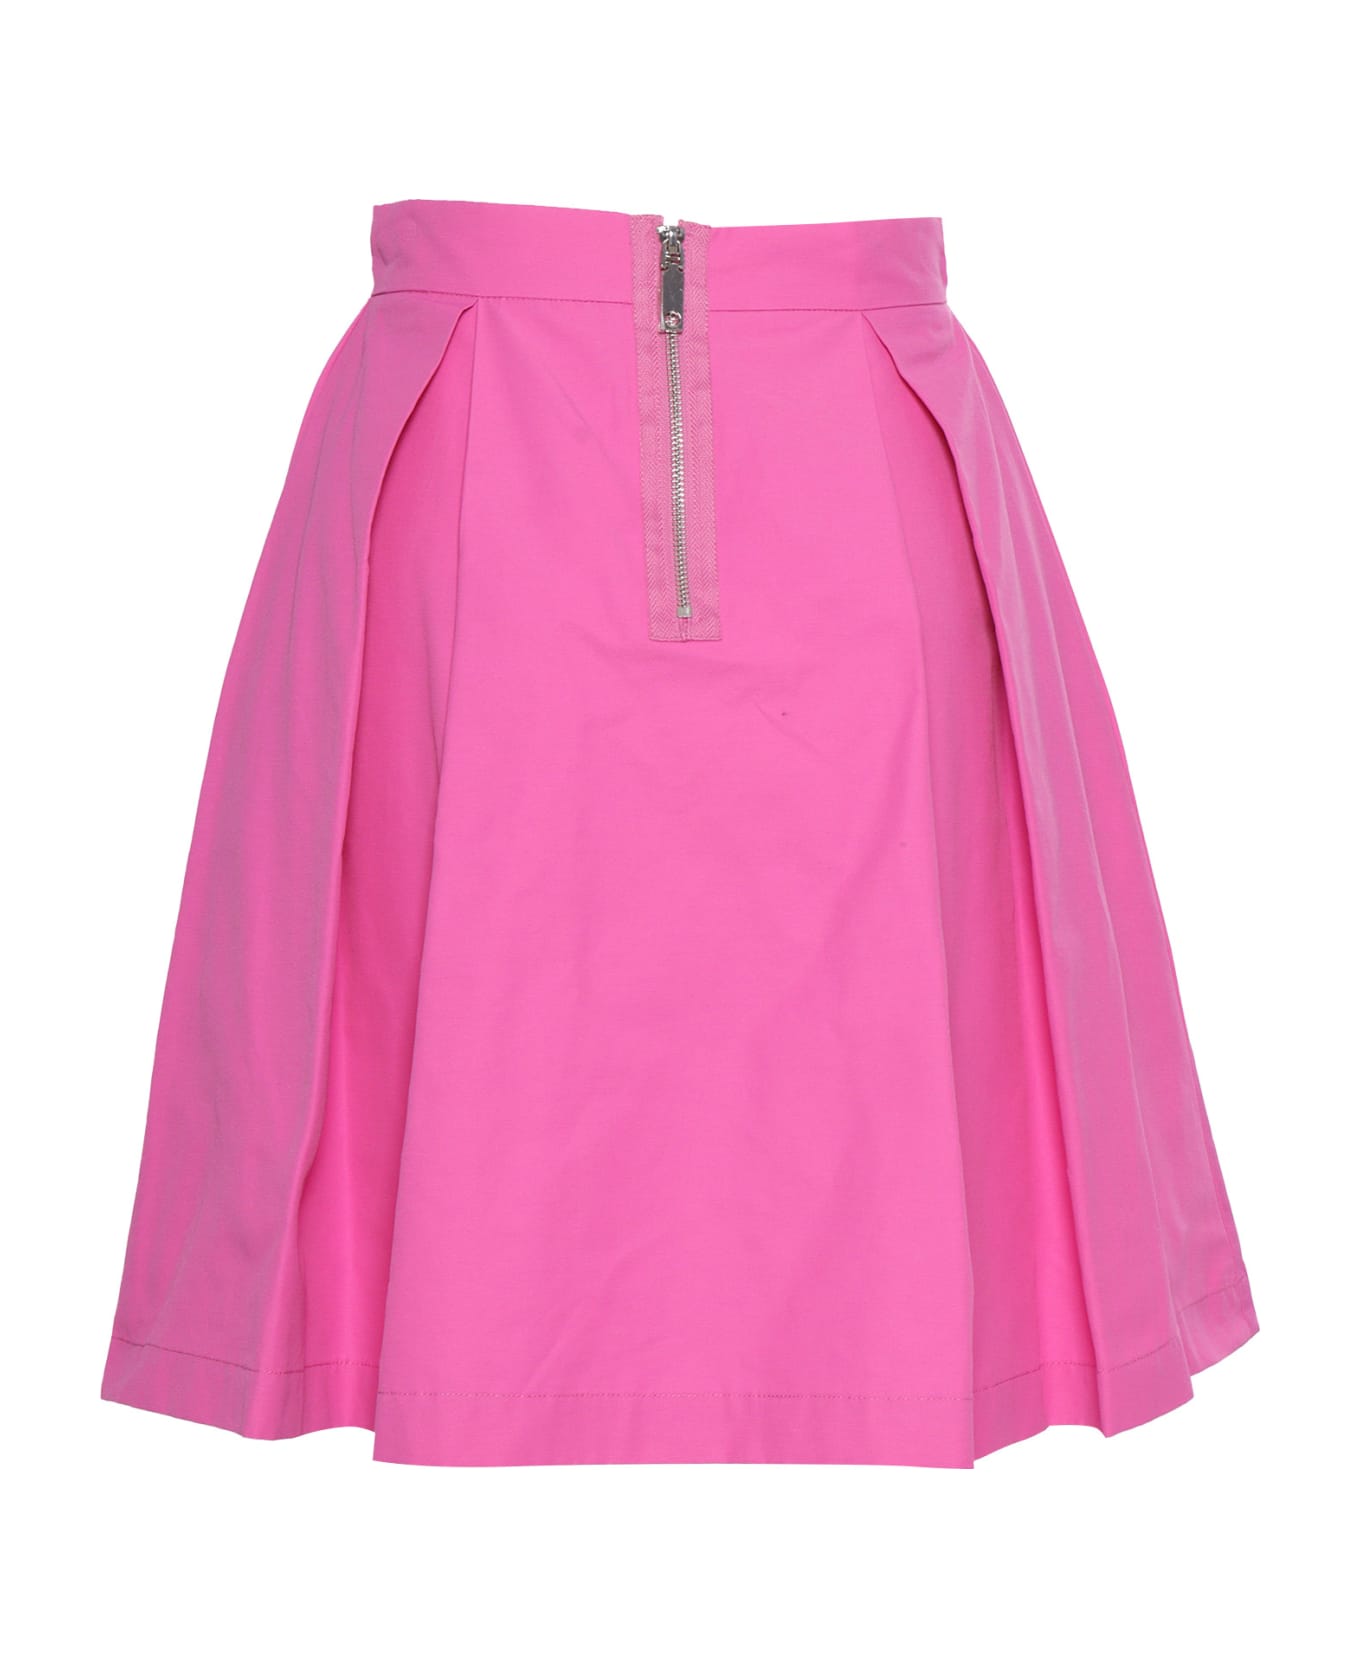 Max&Co. Pink Flared Skirt - PINK